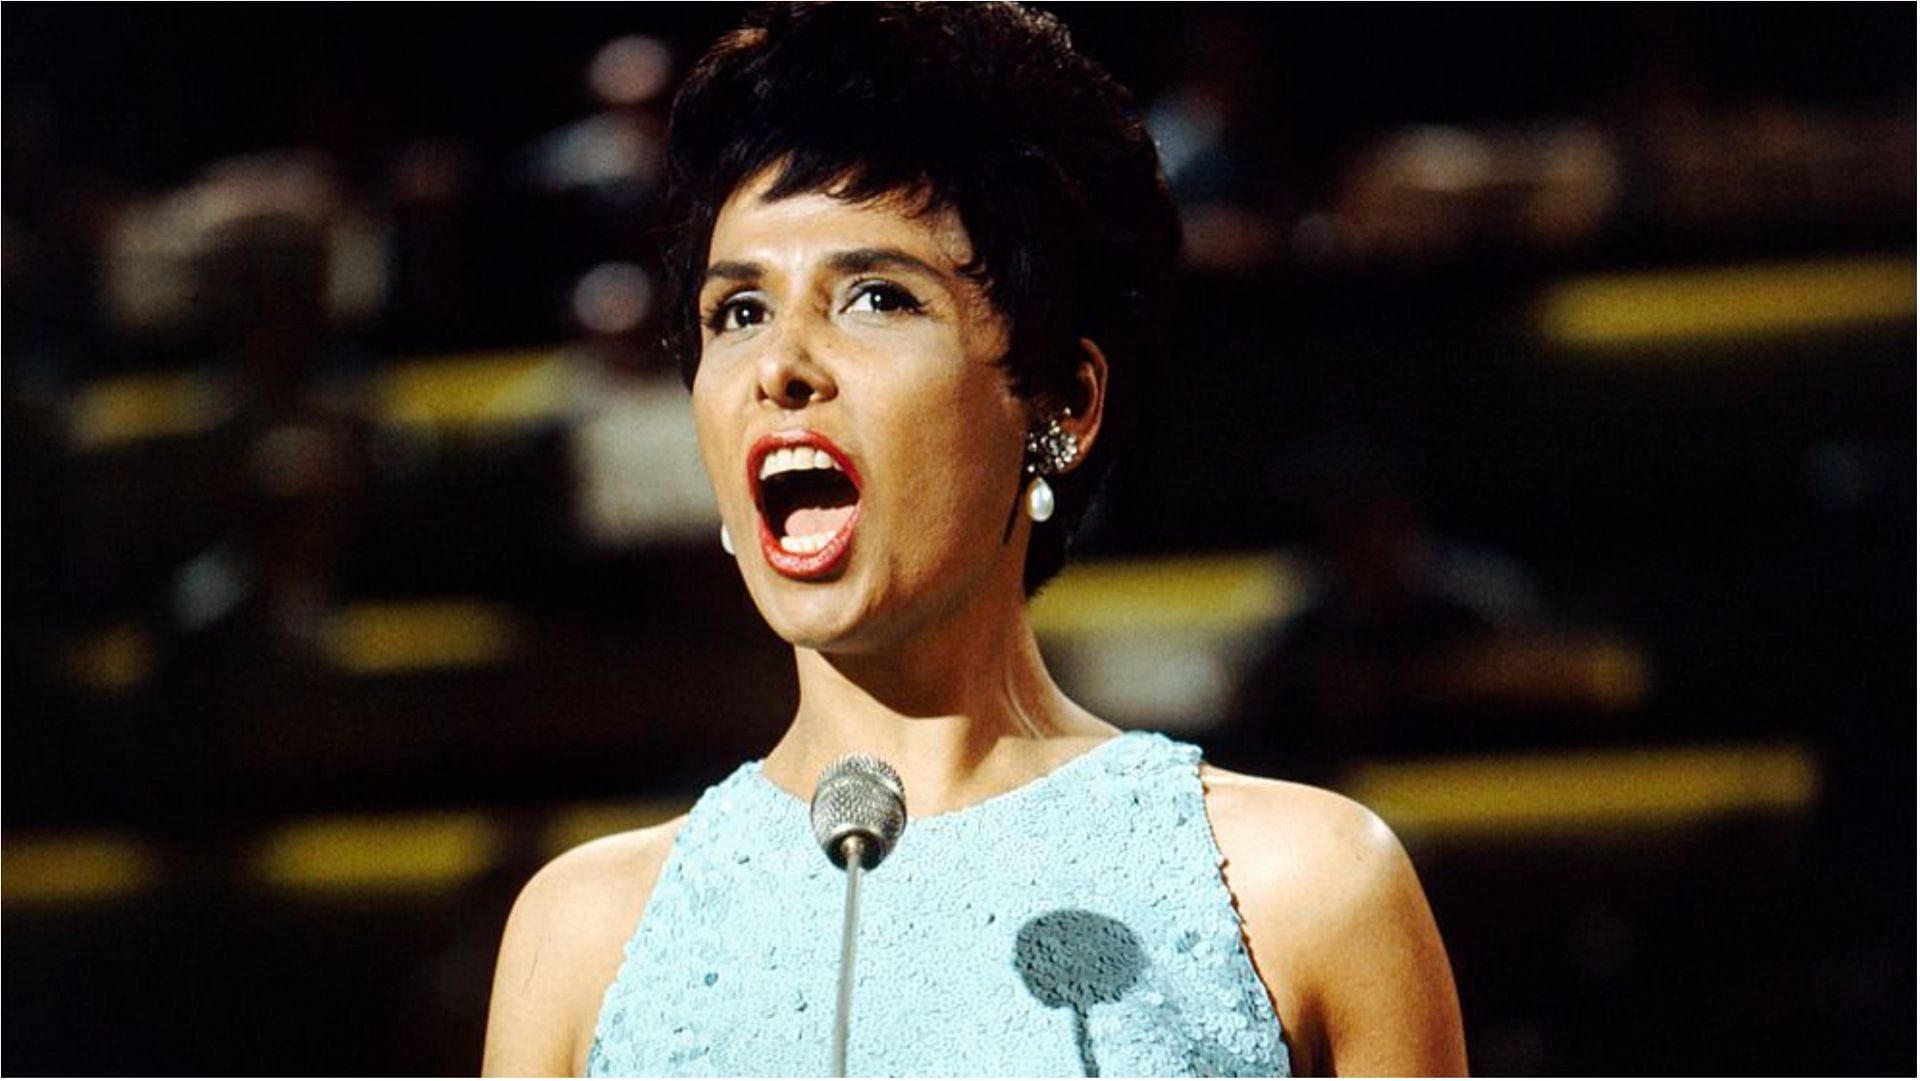 Lena Horne was well-known for her appearance in MGM projects (Image via Popperfoto/Getty Images)